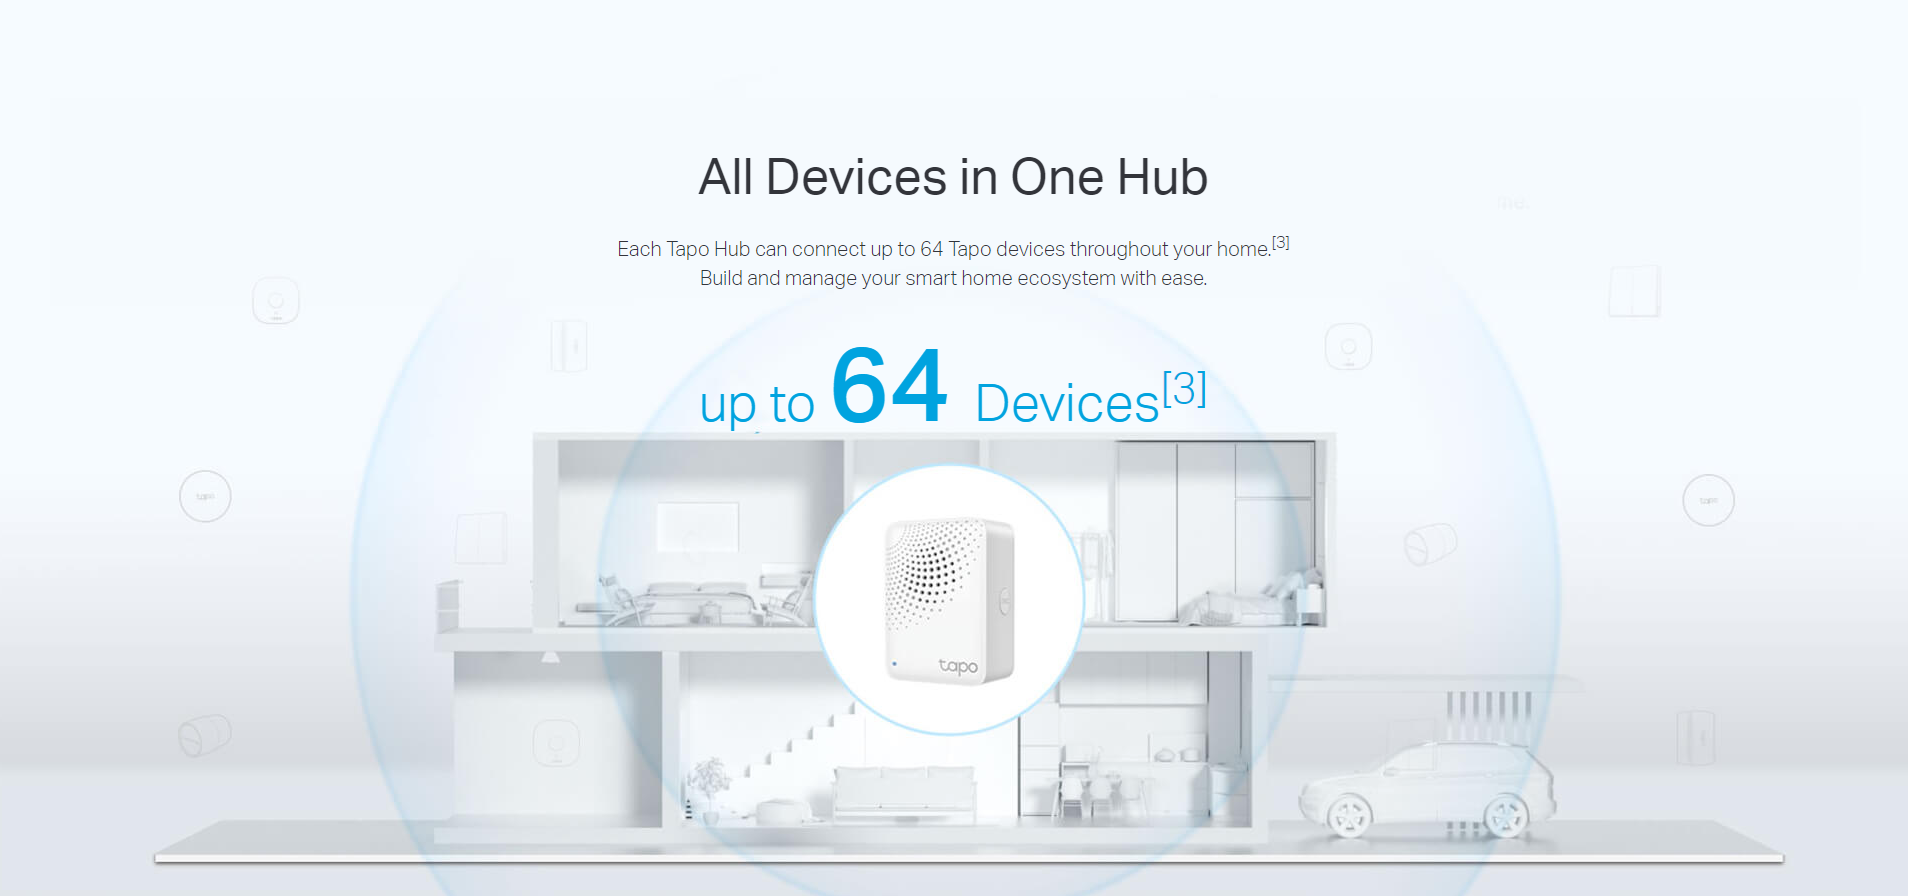 All Devices in One Hub
Each Tapo Hub can connect up to 64 Tapo devices throughout your home.[3]
Build and manage your smart home ecosystem with ease.